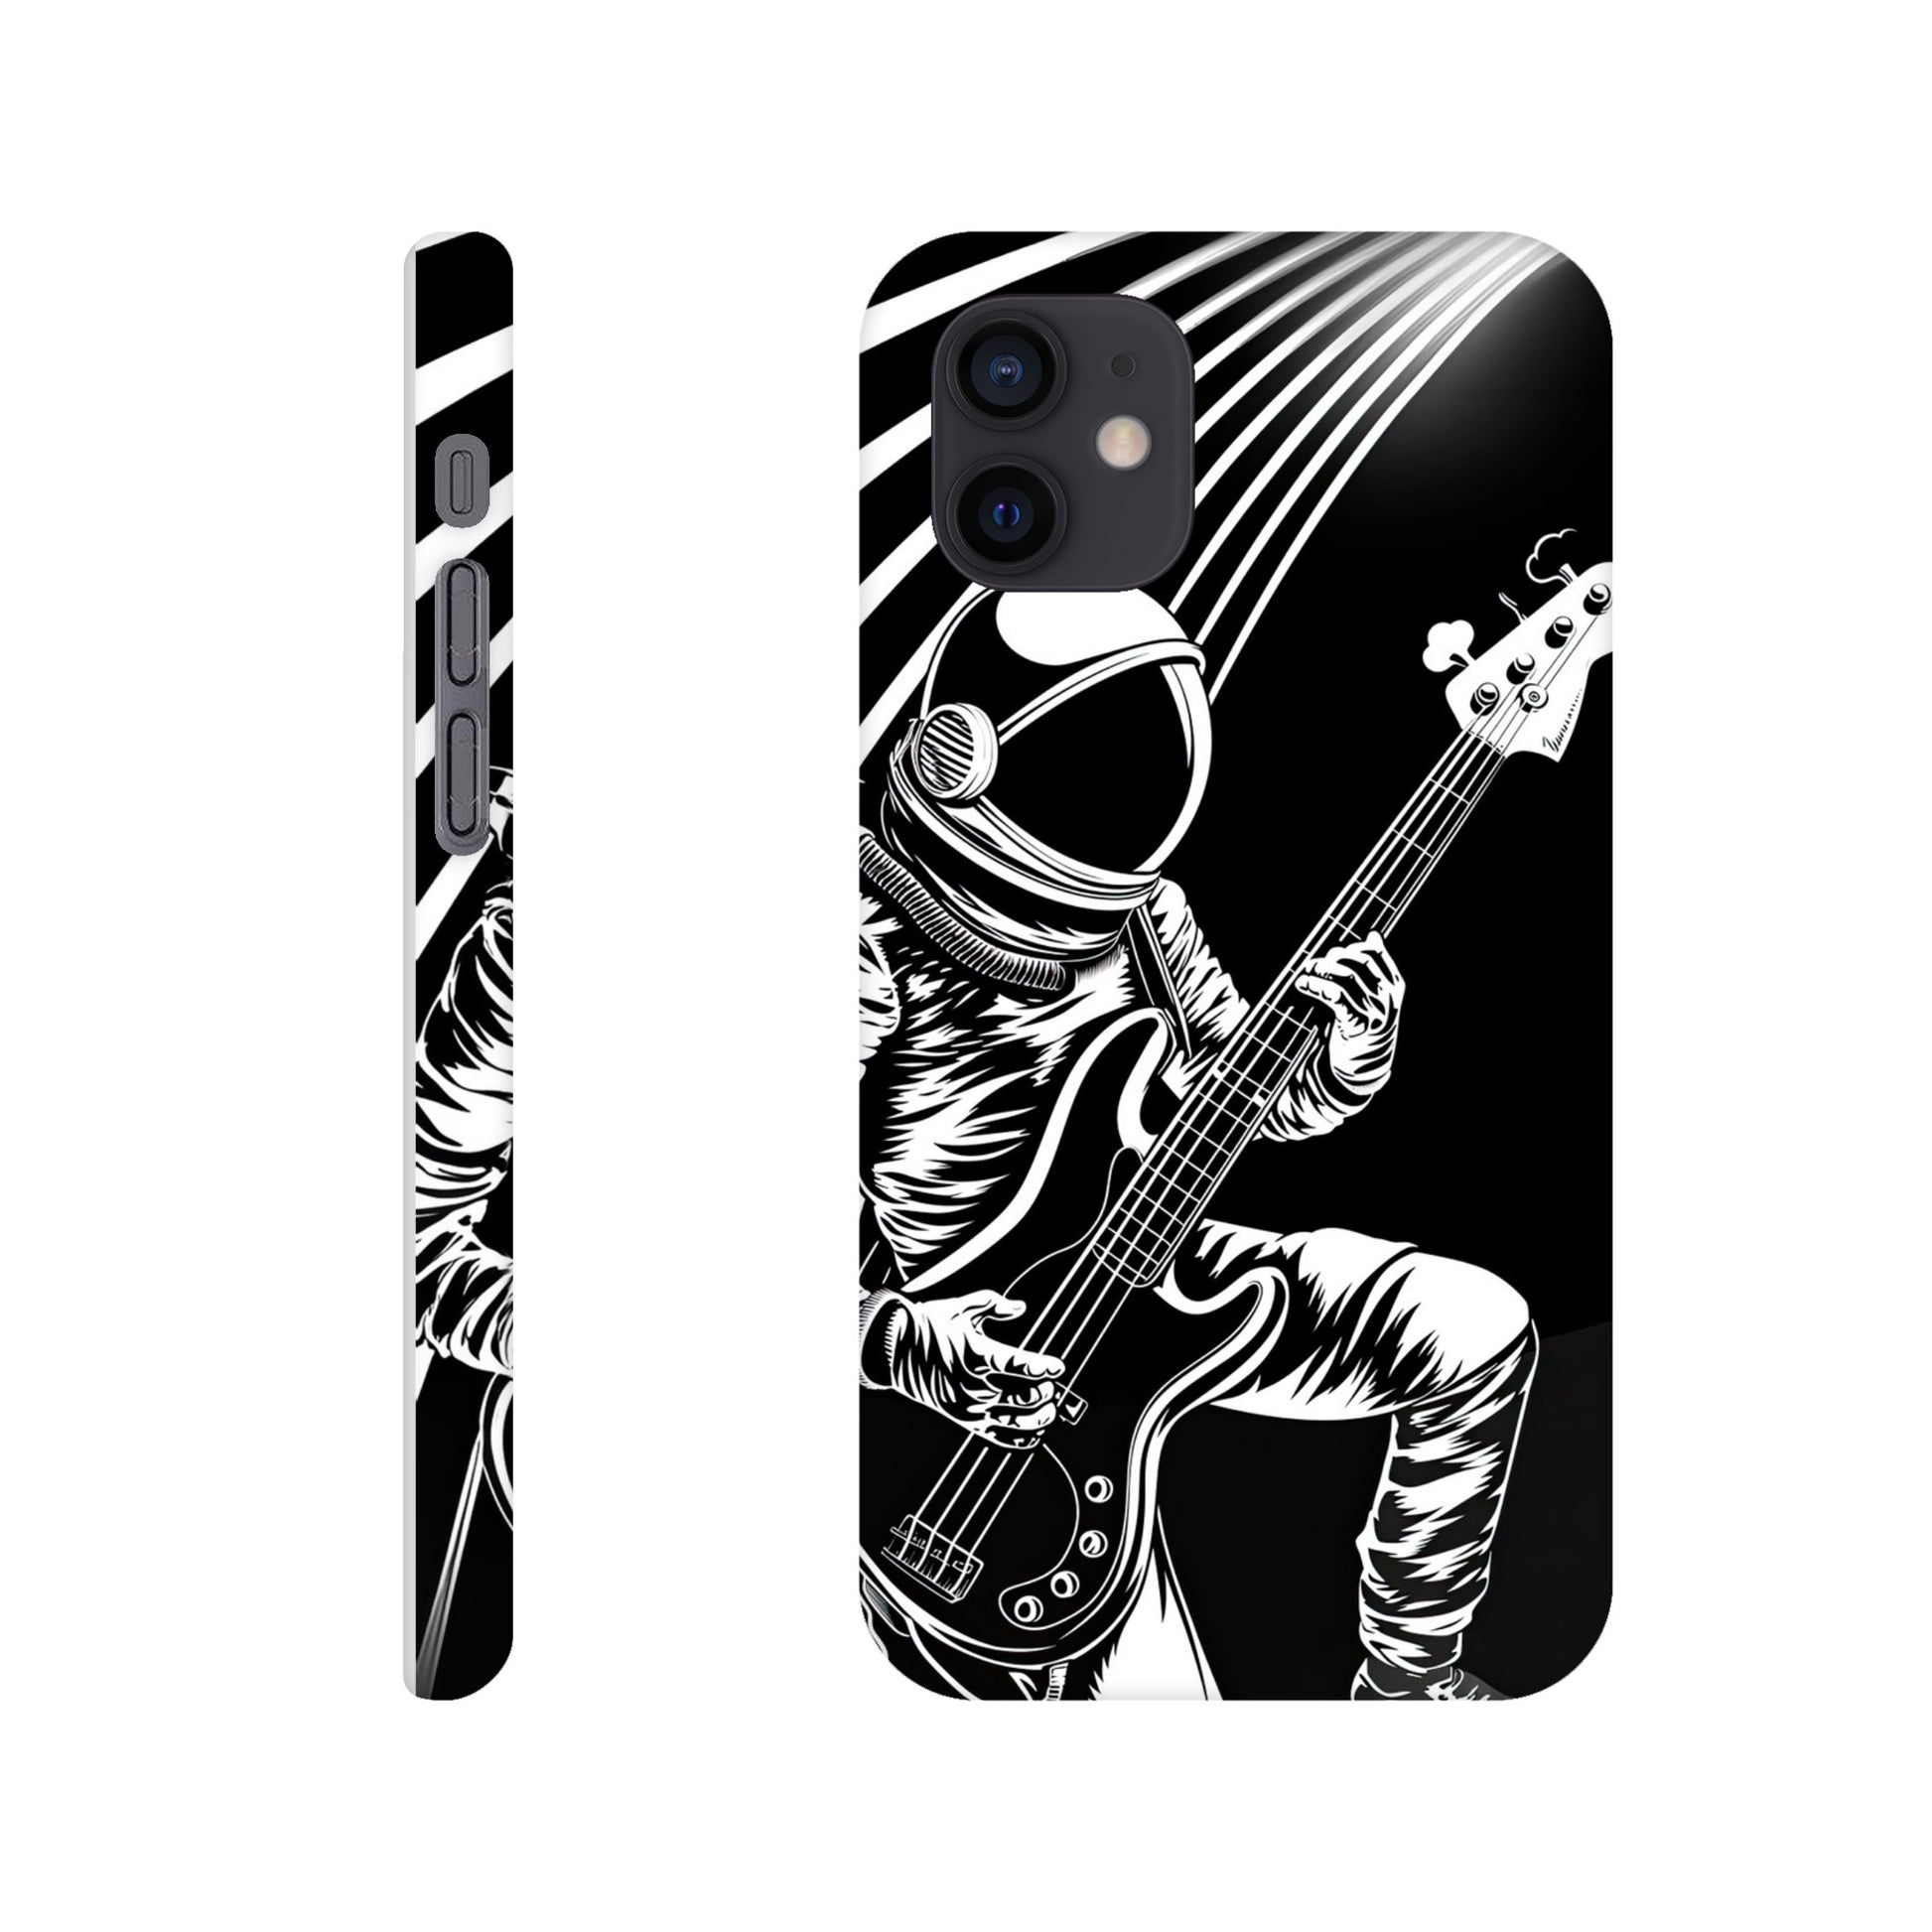 phone case with bass playing spaceman design